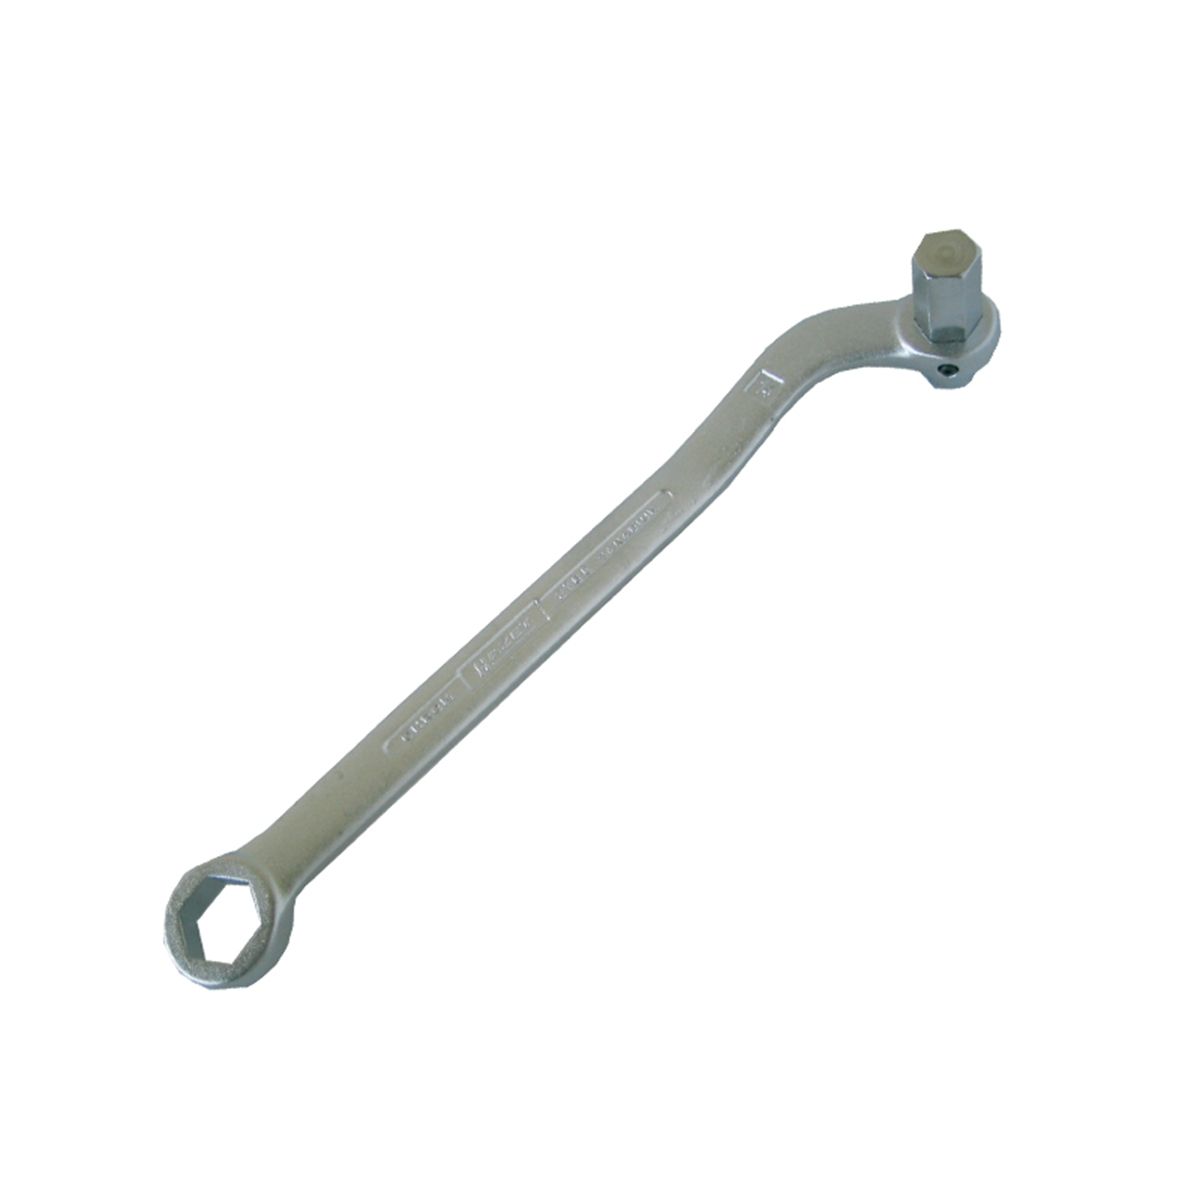 Oil Drain and Filler Plug Wrench for BMW & Mercedes-Benz (H 2760